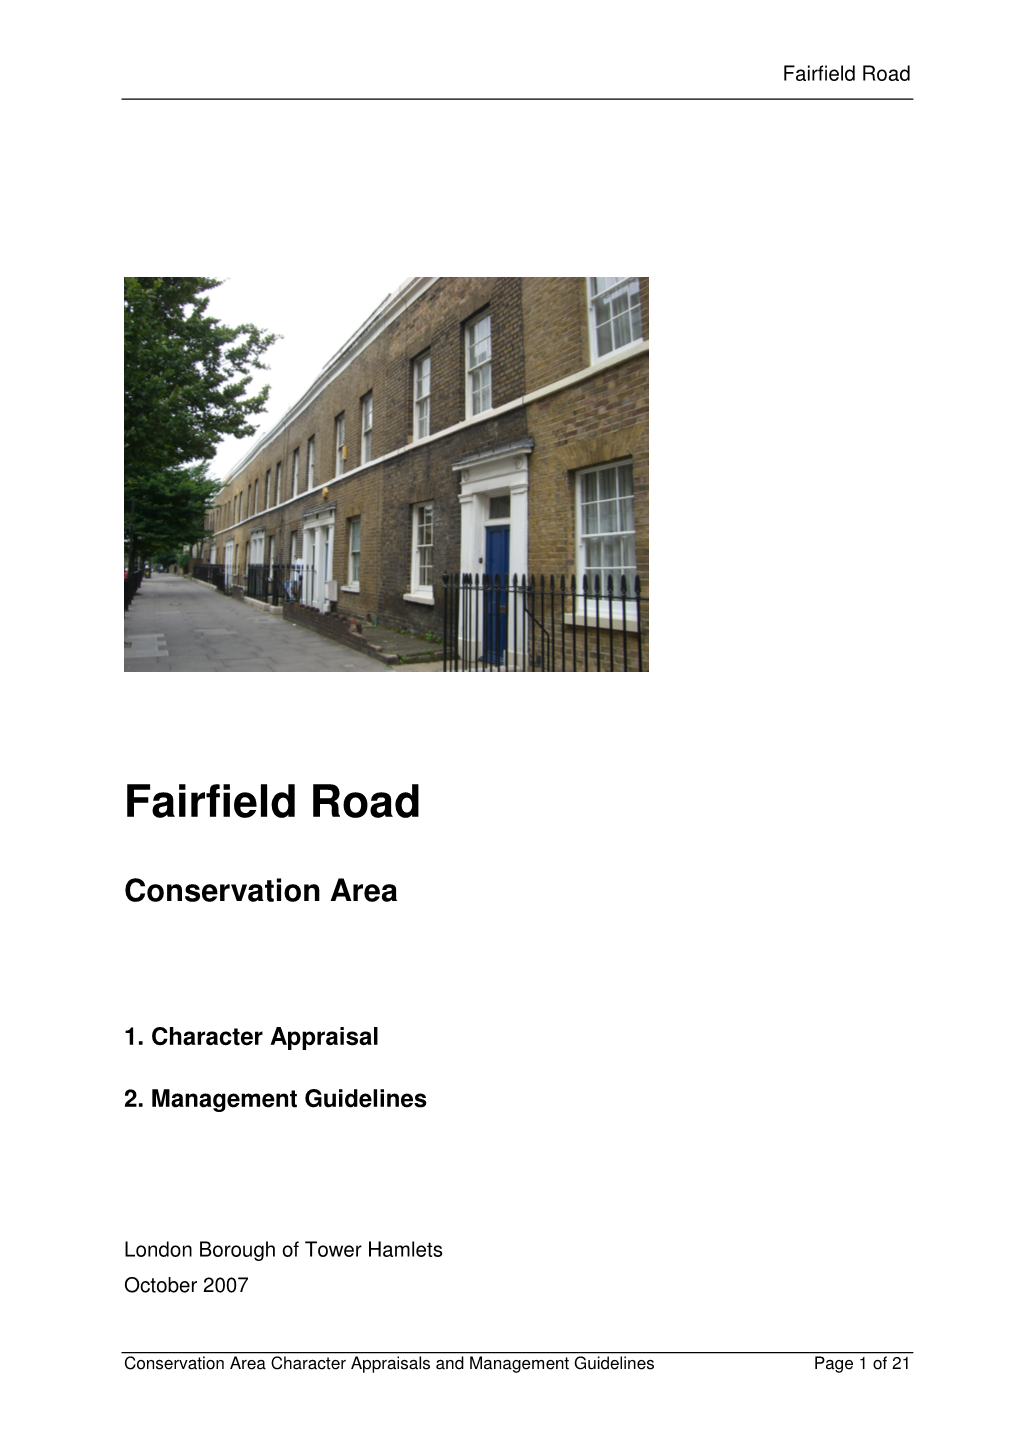 Fairfield Road Conservation Area Was Designated in September 1989